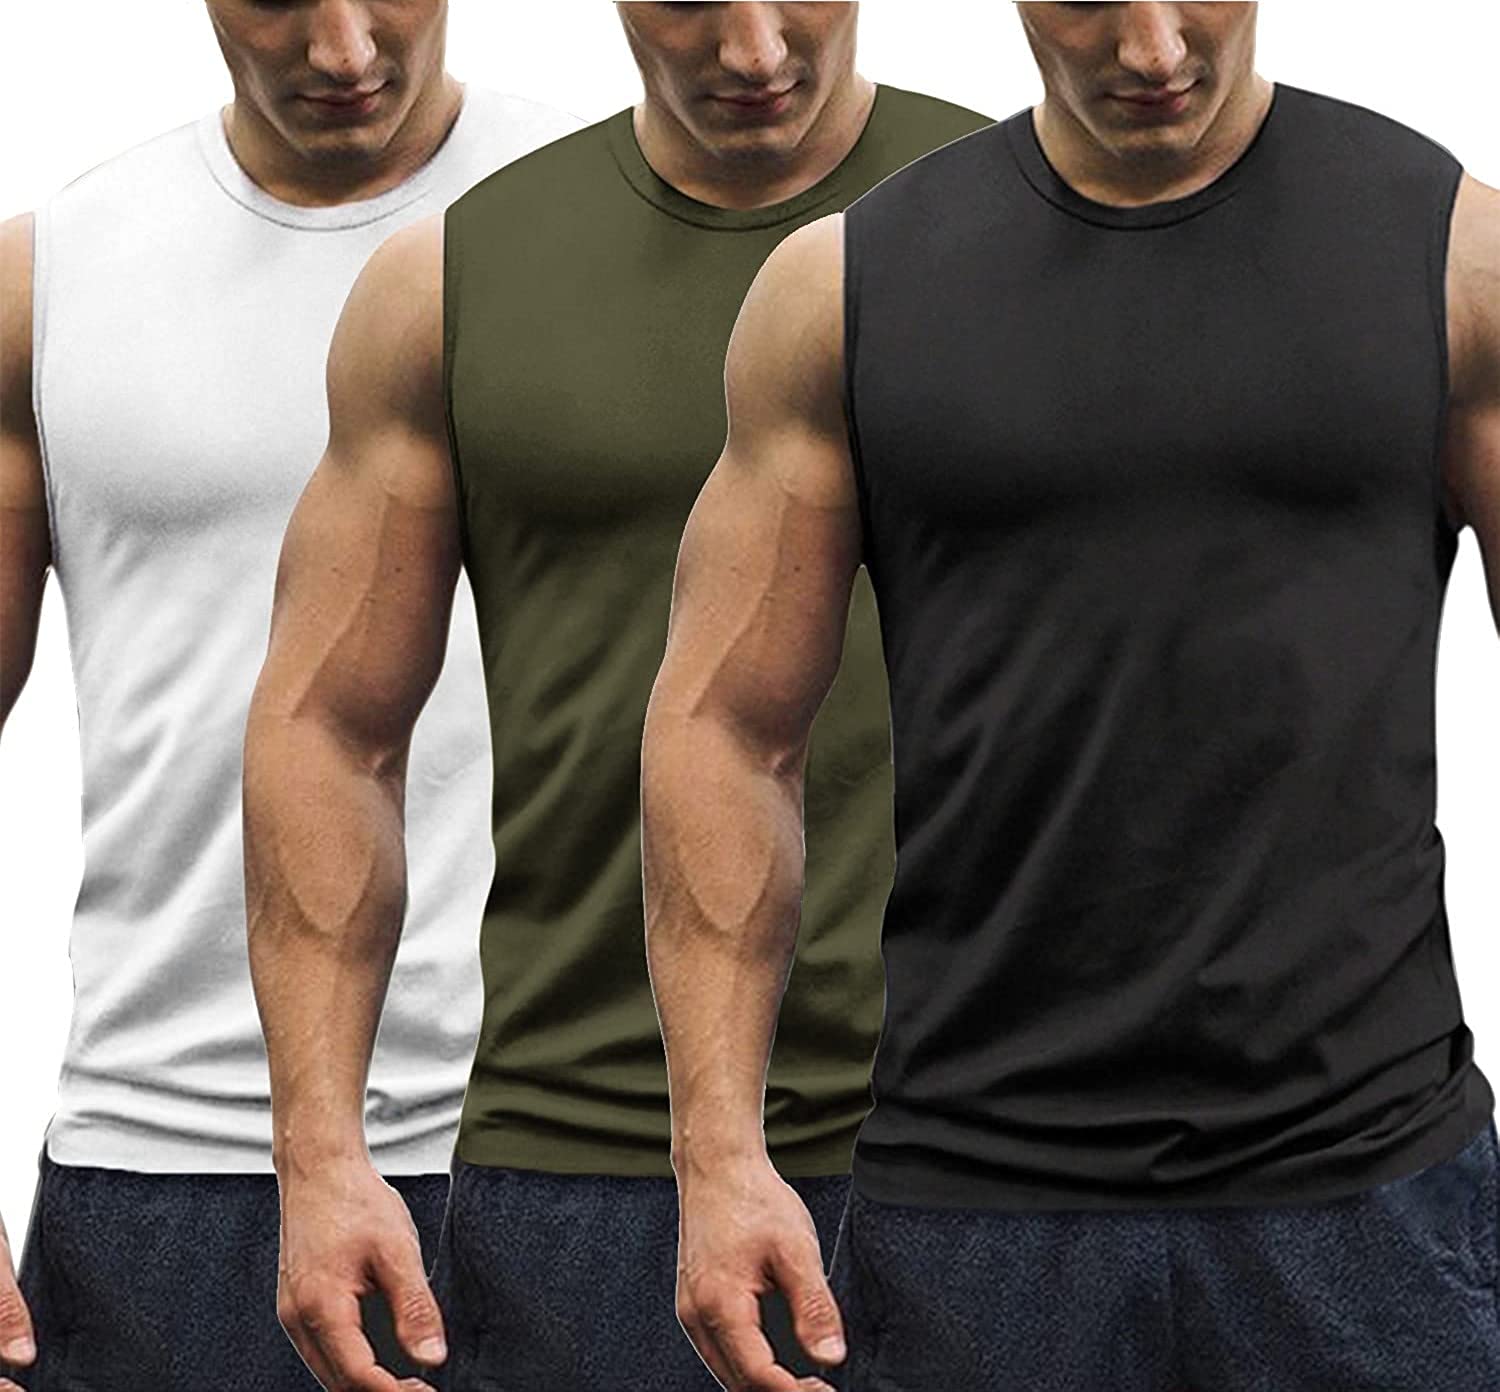 COOFANDY Men's 3 Pack Workout Tank Tops Sleeveless Gym Shirts Bodybuilding Fitness Muscle Tee Shirts 